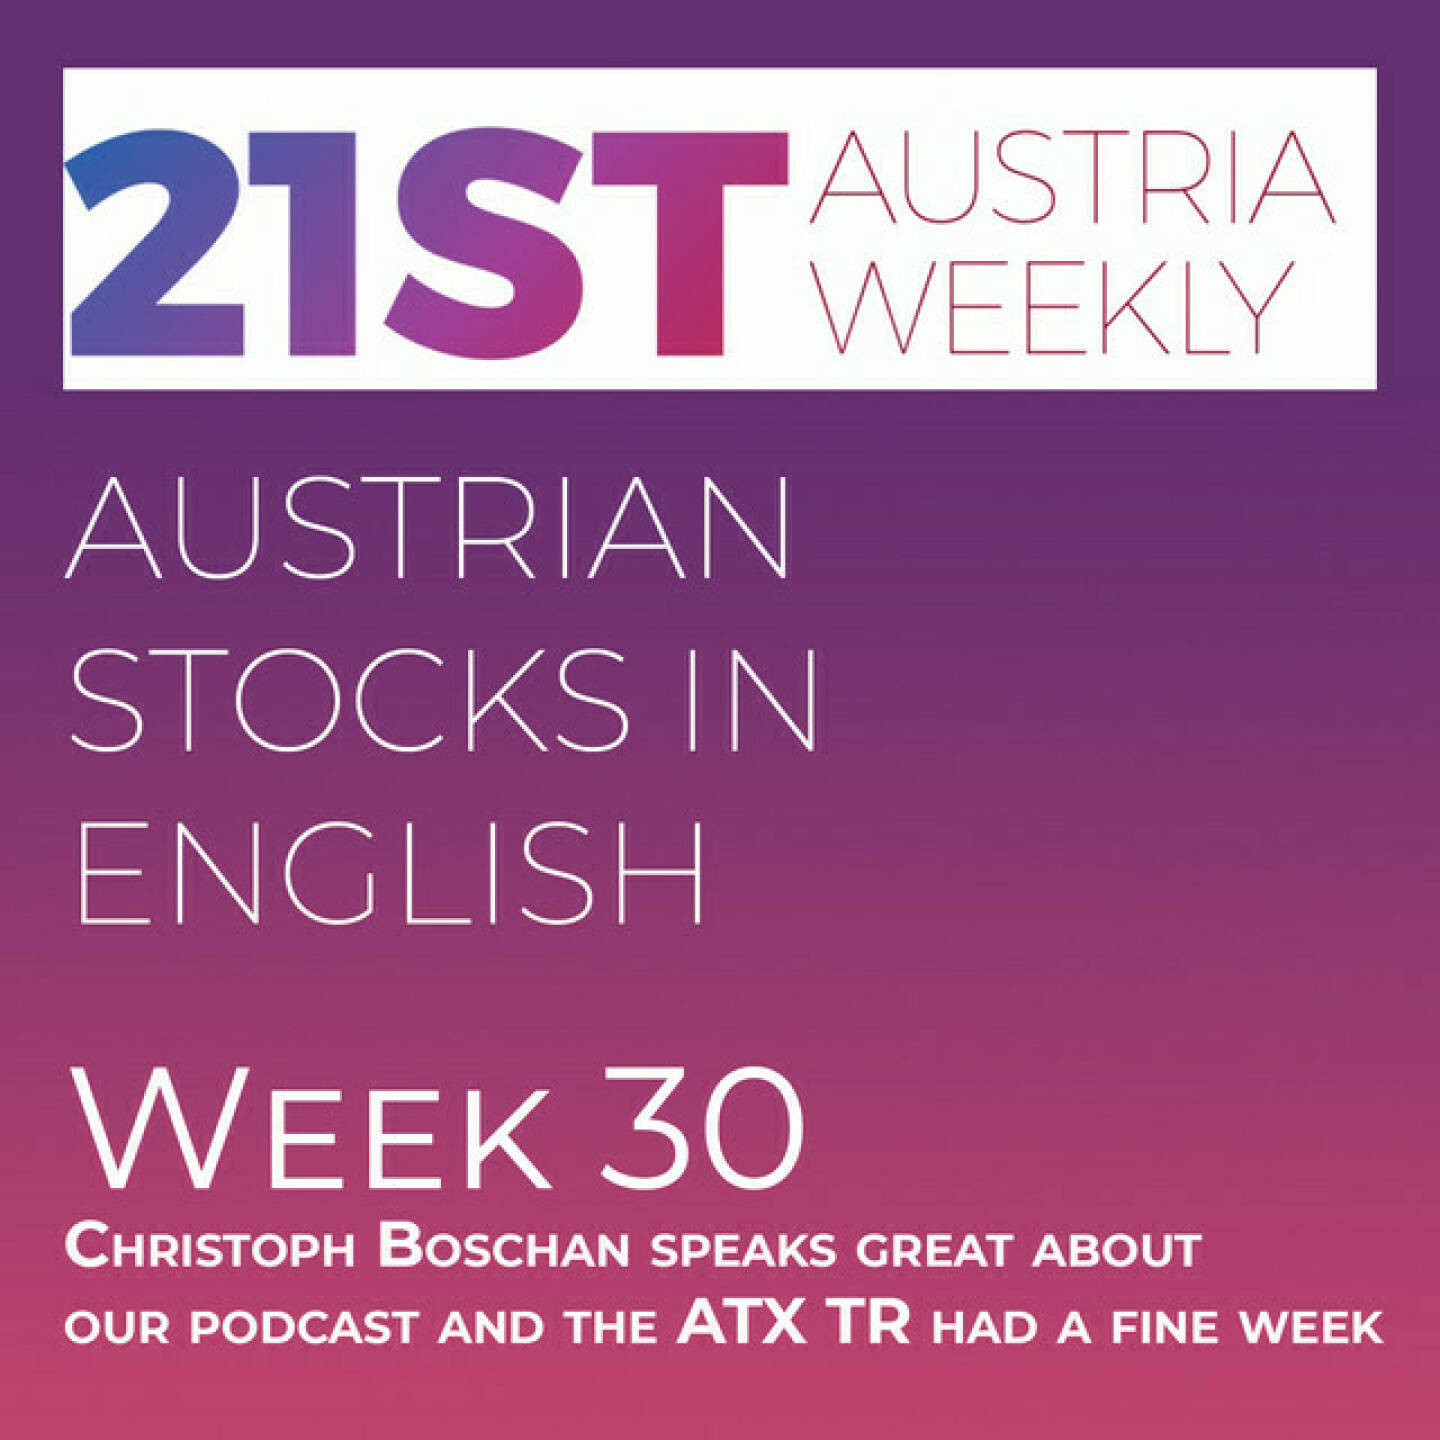 https://open.spotify.com/episode/3TJERHbimp4qikbszWnTrc
Austrian Stocks in English: Christoph Boschan speaks great about our podcast and the ATX TR had a fine week - <p>Welcome to &#34;Austrian Stocks in English - presented by Palfinger&#34;, the new and weekly english spoken Summary for the Austrian Stock Market, positioned every Sunday in the mostly german languaged Podcast &#34;Christian Drastil - Wiener Börse, Sport Musik und mehr&#34; (http://www.christian-drastil.com/podcast). In week 30 we saw a strong ATX TR, which gained p2,92% to 6.389,73 points.  These were the best-performers this week: Amag 12,72% in front of RBI 11,67% and Andritz 8,53%. And the following stocks performed worst: Warimpex -5,39% in front of AT&amp;S -4,89% and Zumtobel -1%. Congratulations to Pierer Mobility who won the 12th Stock Market Tournament. News came from Erste Group, Addiko Bank, Verbund (2), OMV (2), Wienerberger, Petro Welt Technologies, Palfinger, Andritz and ams Osram. </p><br/><p>And finally thanks to Vienna Stock Exchange CEO Christoph Boschan, who talked in our Podcast (German spoken, listen hear: <a href=https://boersenradio.at/page/playlist/2068 rel=nofollow>https://boersenradio.at/page/playlist/2068</a>) about his vita and found nice words on LinkedIn for us: &#34;Christian, you’re one of the top influencers for topics concerning Wiener Boerse and I’m impressed by the massive amount of creativity you demonstrate regularly. Thanks for the several years of cooperation and your loyalty to our market.&#34;</p>